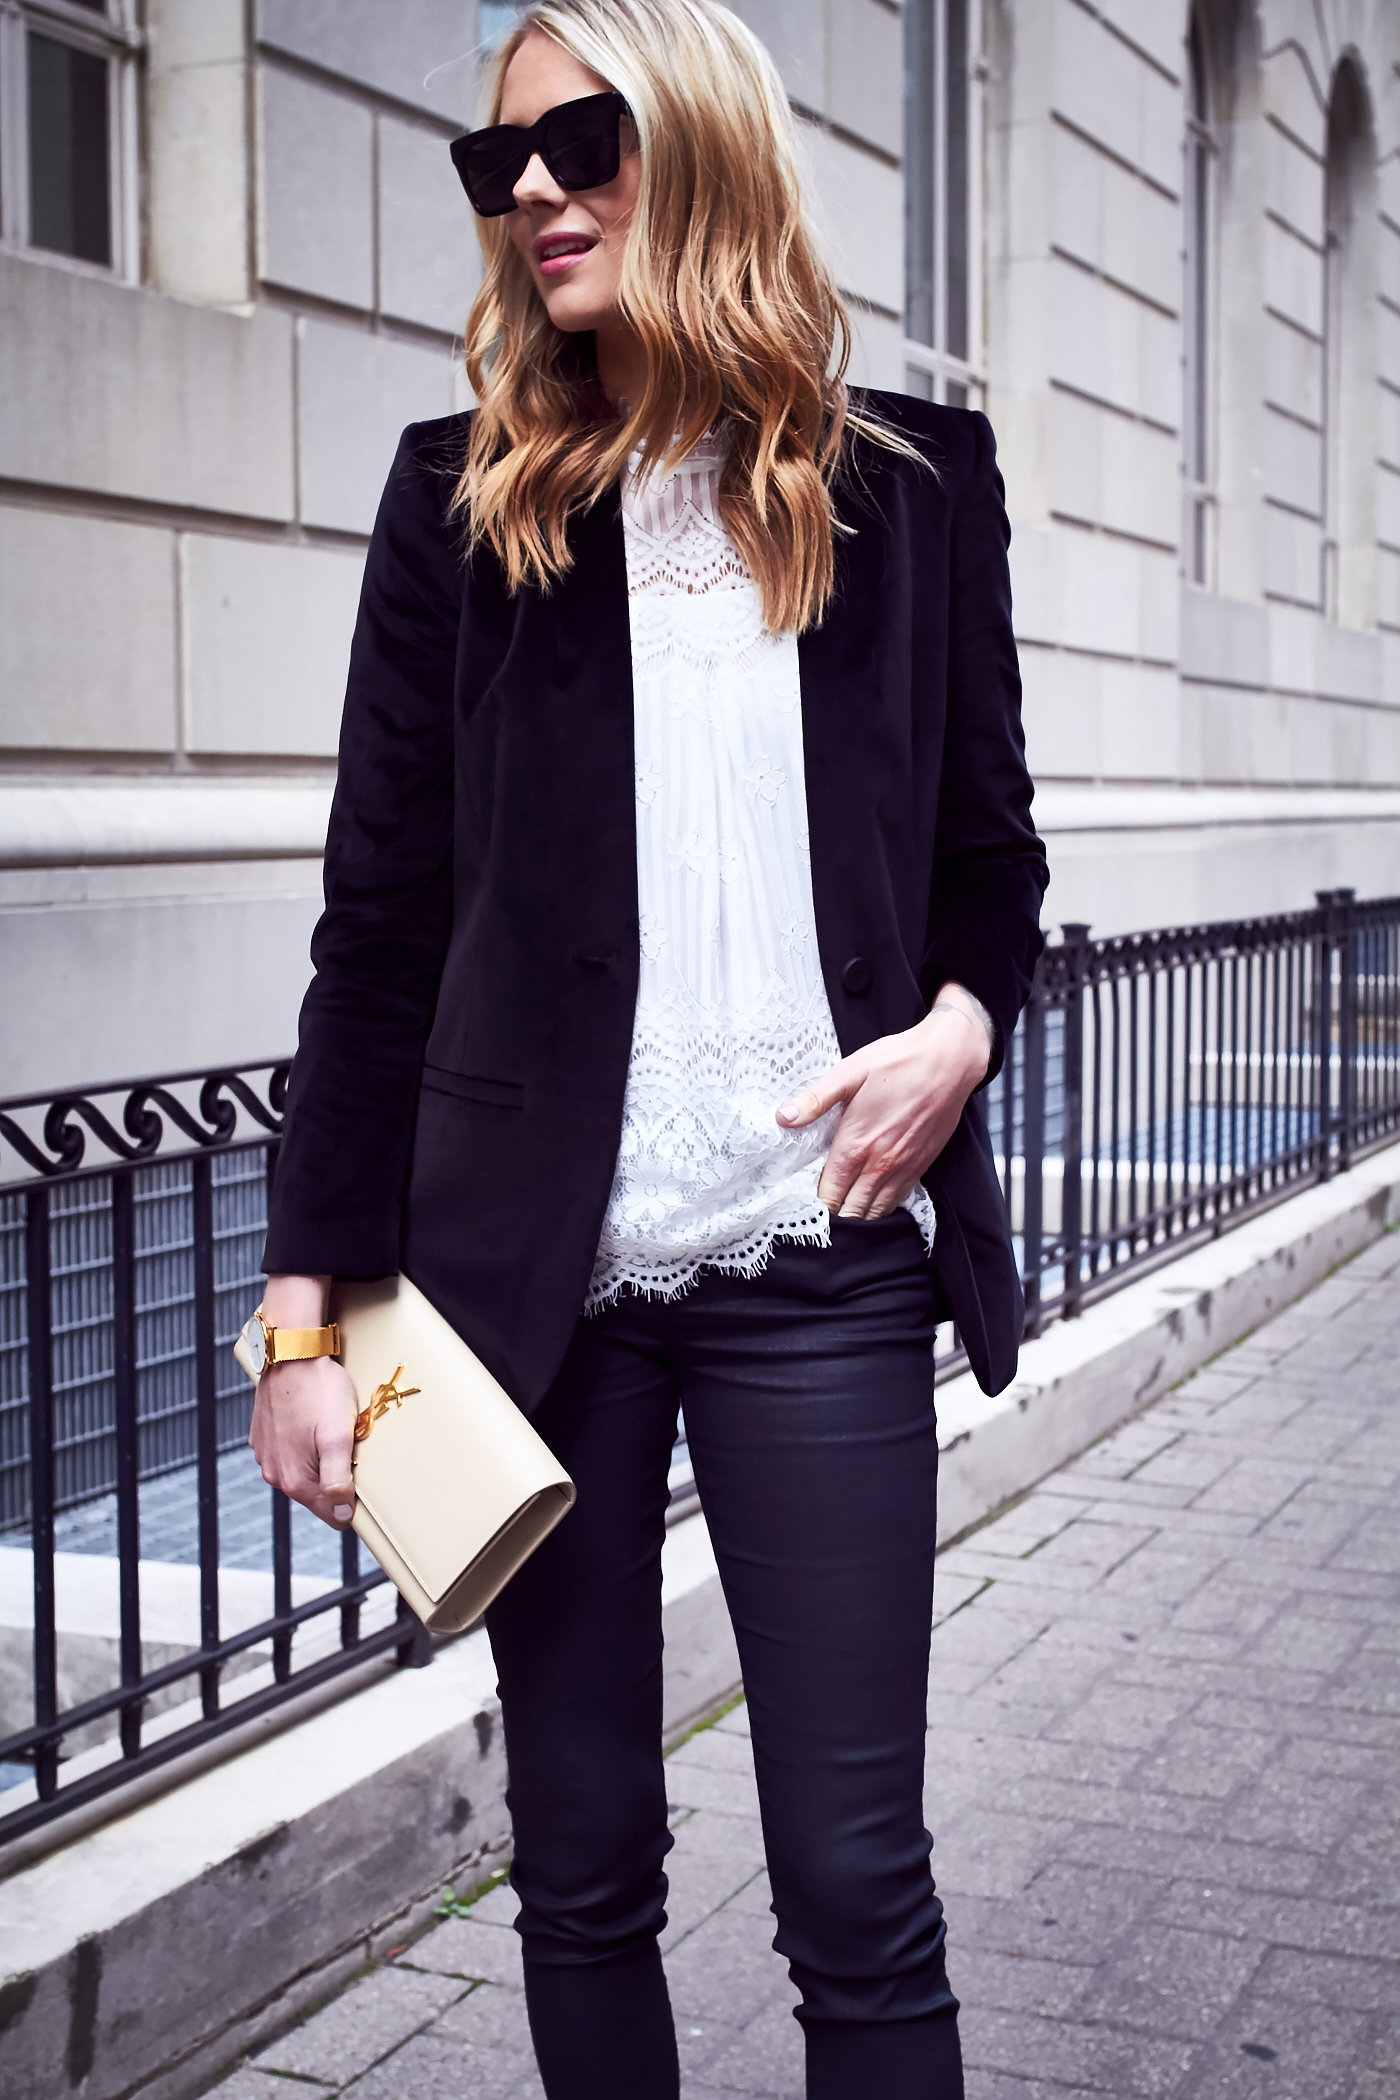 Fall Outfit, Holiday Outfit, White Lace Top, Black Velvet Blazer, Saint Laurent Clutch, Black Skinny Jeans